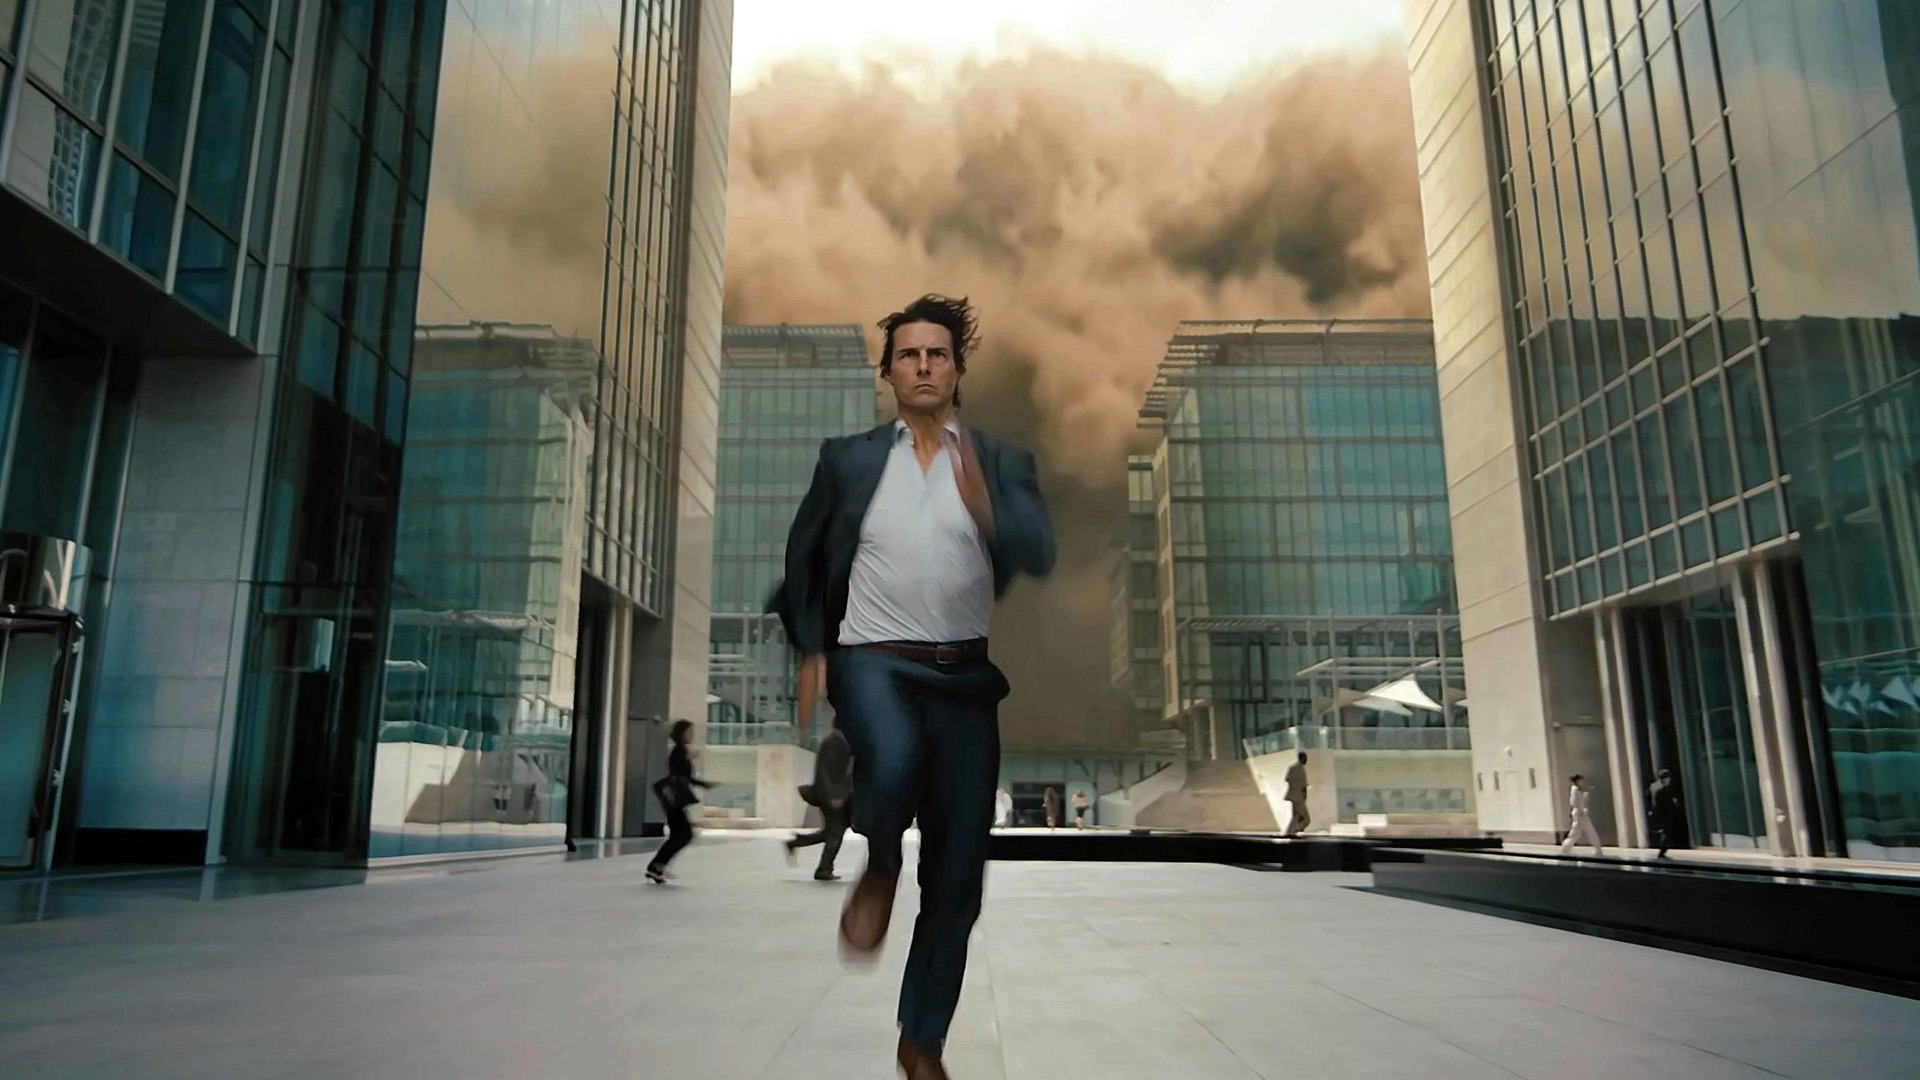 Mission: Impossible - Ghost Protocol 碟中谍4 高清壁纸11 - 1920x1080